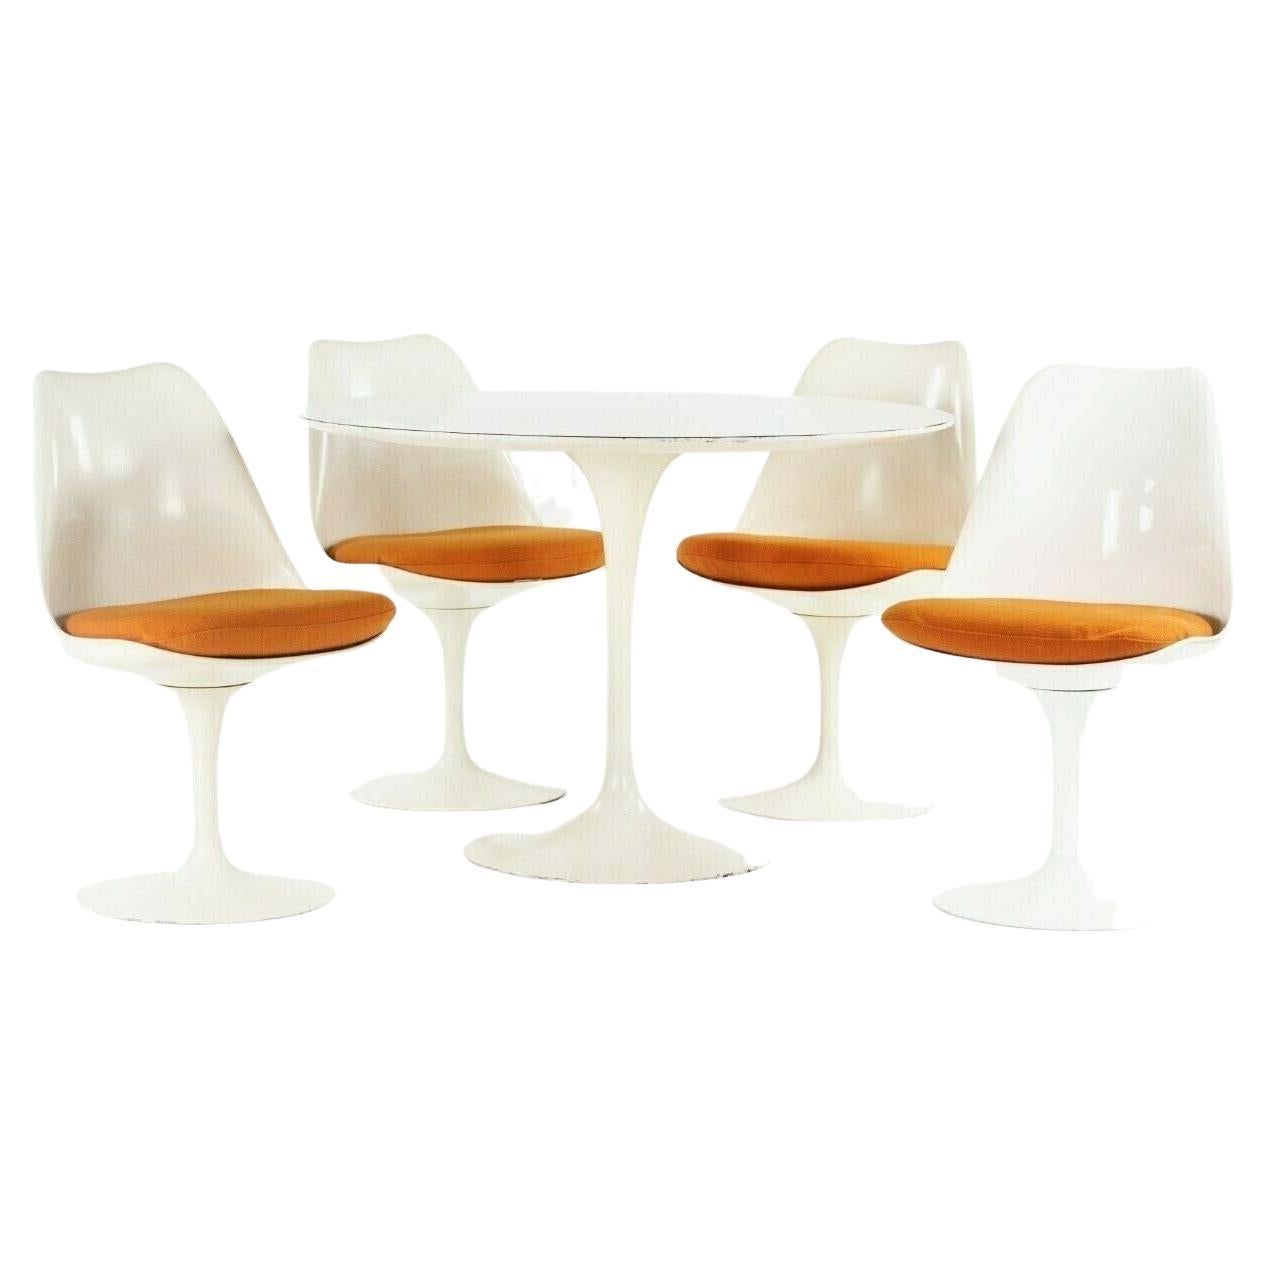 1960s Eero Saarinen for Knoll Tulip Dining Table & Four White Tulip Side Chairs For Sale